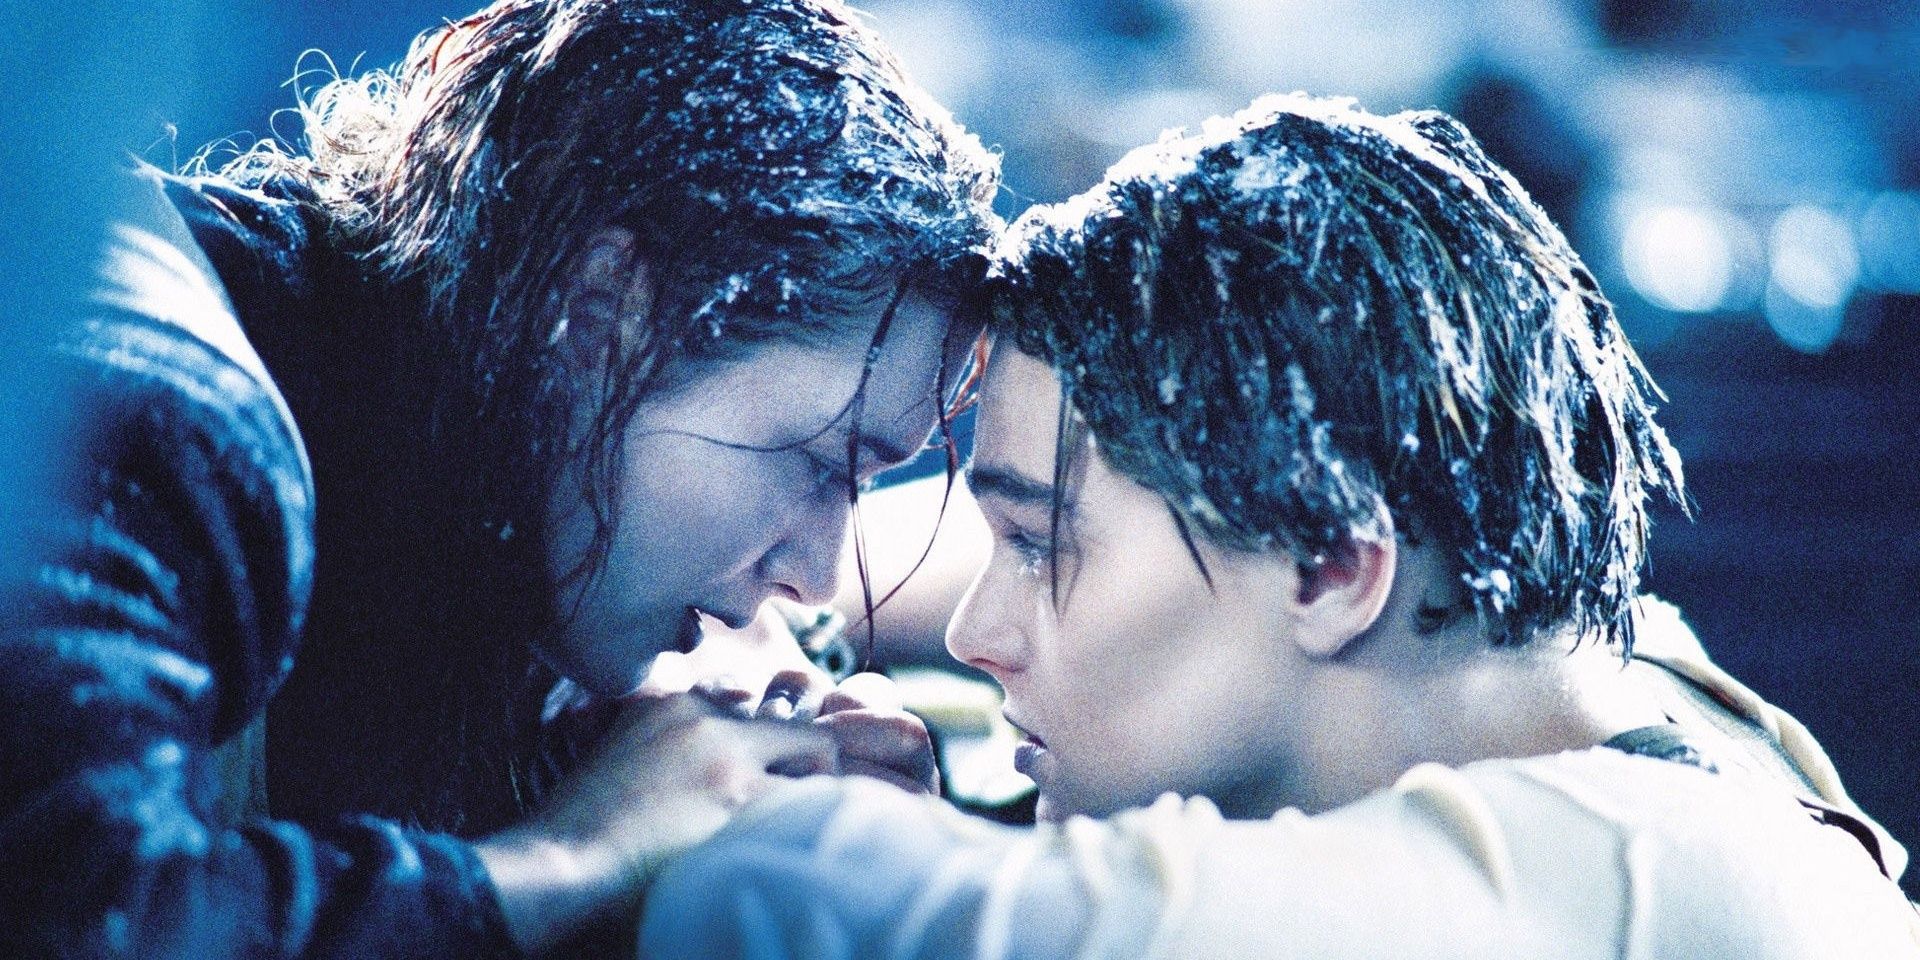 Jack and Rose talking to each other in Titanic